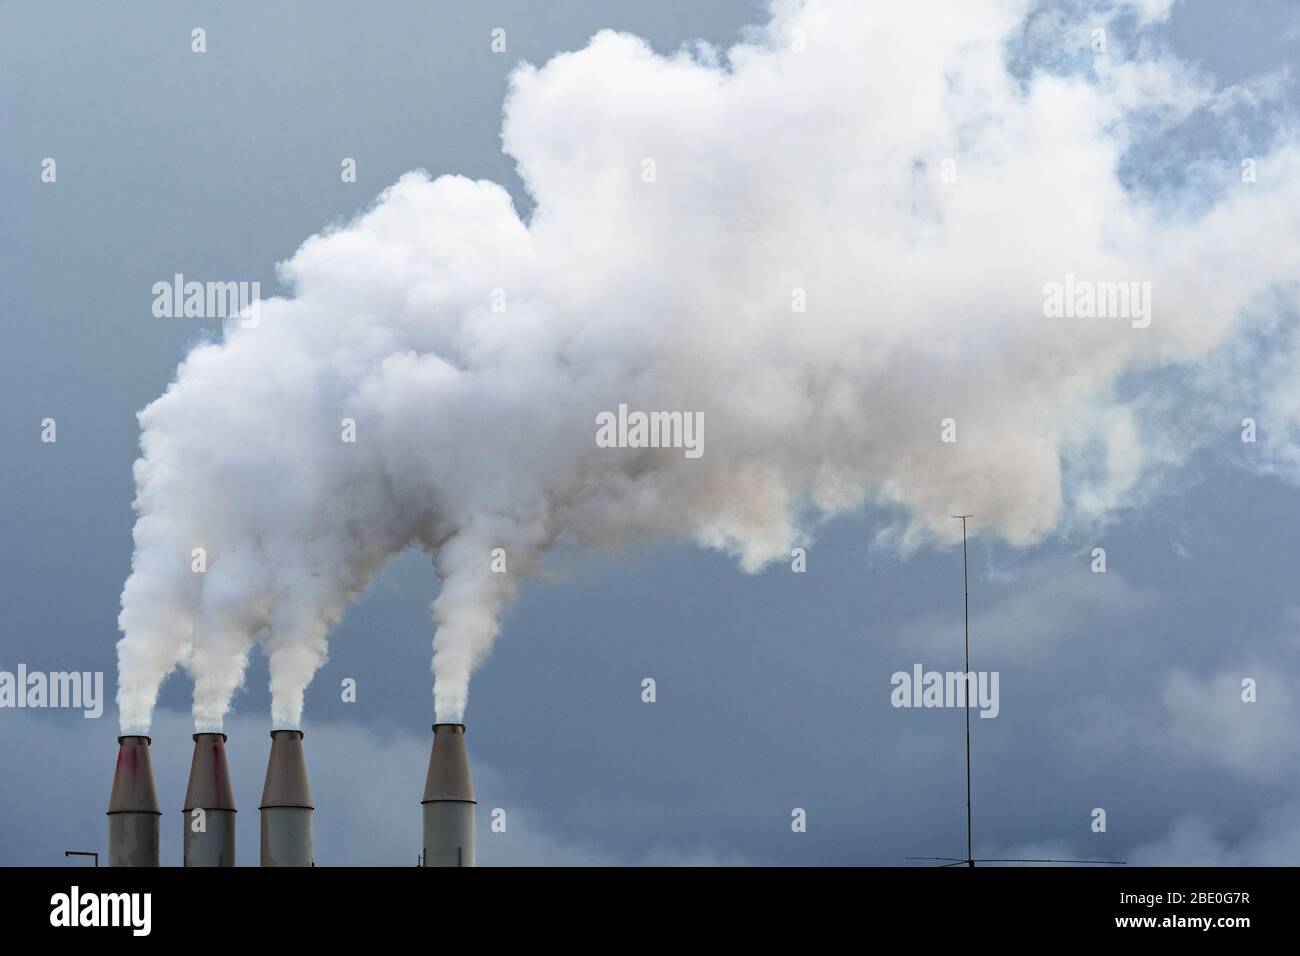 Smoke and steam rising into the air from power plant stacks; dark clouds background; concept for environmental pollution and climate change Stock Photo